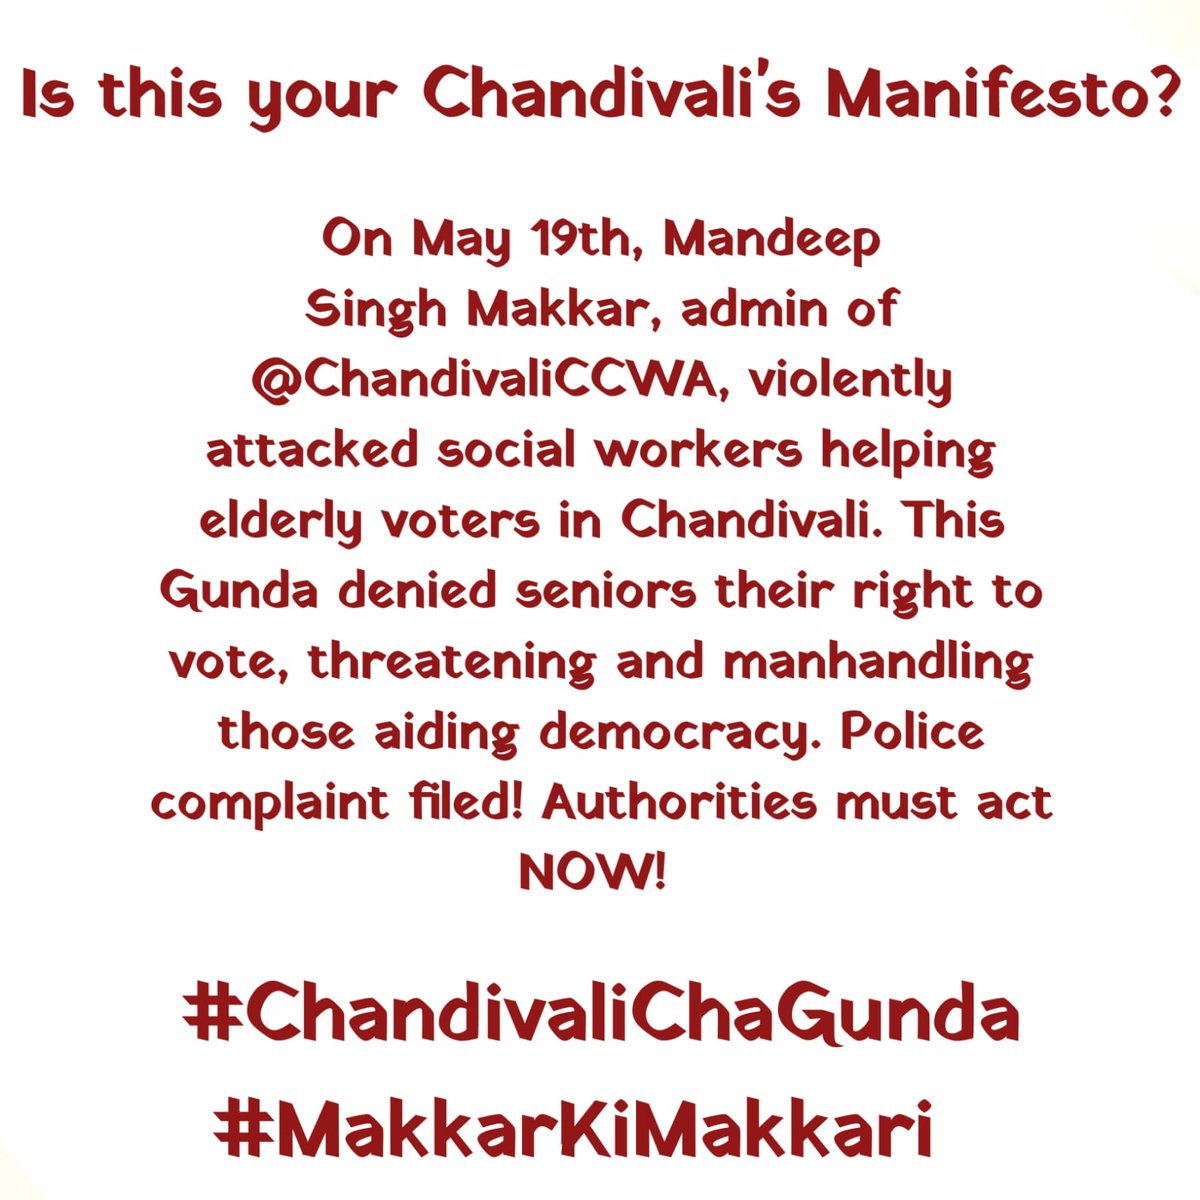 Thread Alert: Shocking incident unveiling true face of 'Neutral' Mandeep Singh Makkar

On May 19th, 2024, an unfortunate incident took place in Chandivali involving Mandeep Singh Makkar, the admin of @ChandivaliCCWA.

Mandeep Singh Makkar manhandled social workers who were